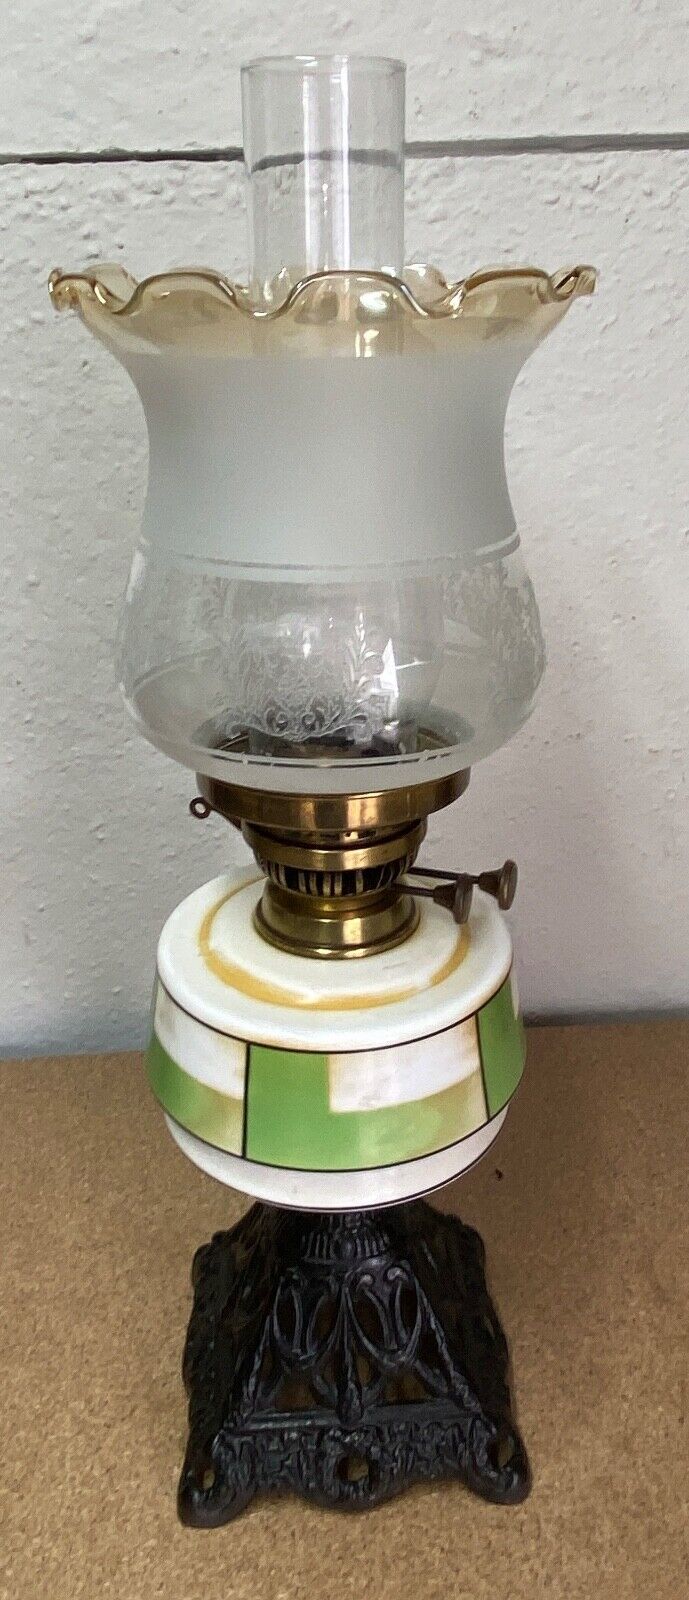 VINTAGE DUPLEX OIL LAMP WITH CERAMIC RESERVOIR AND CAST IRON STAND